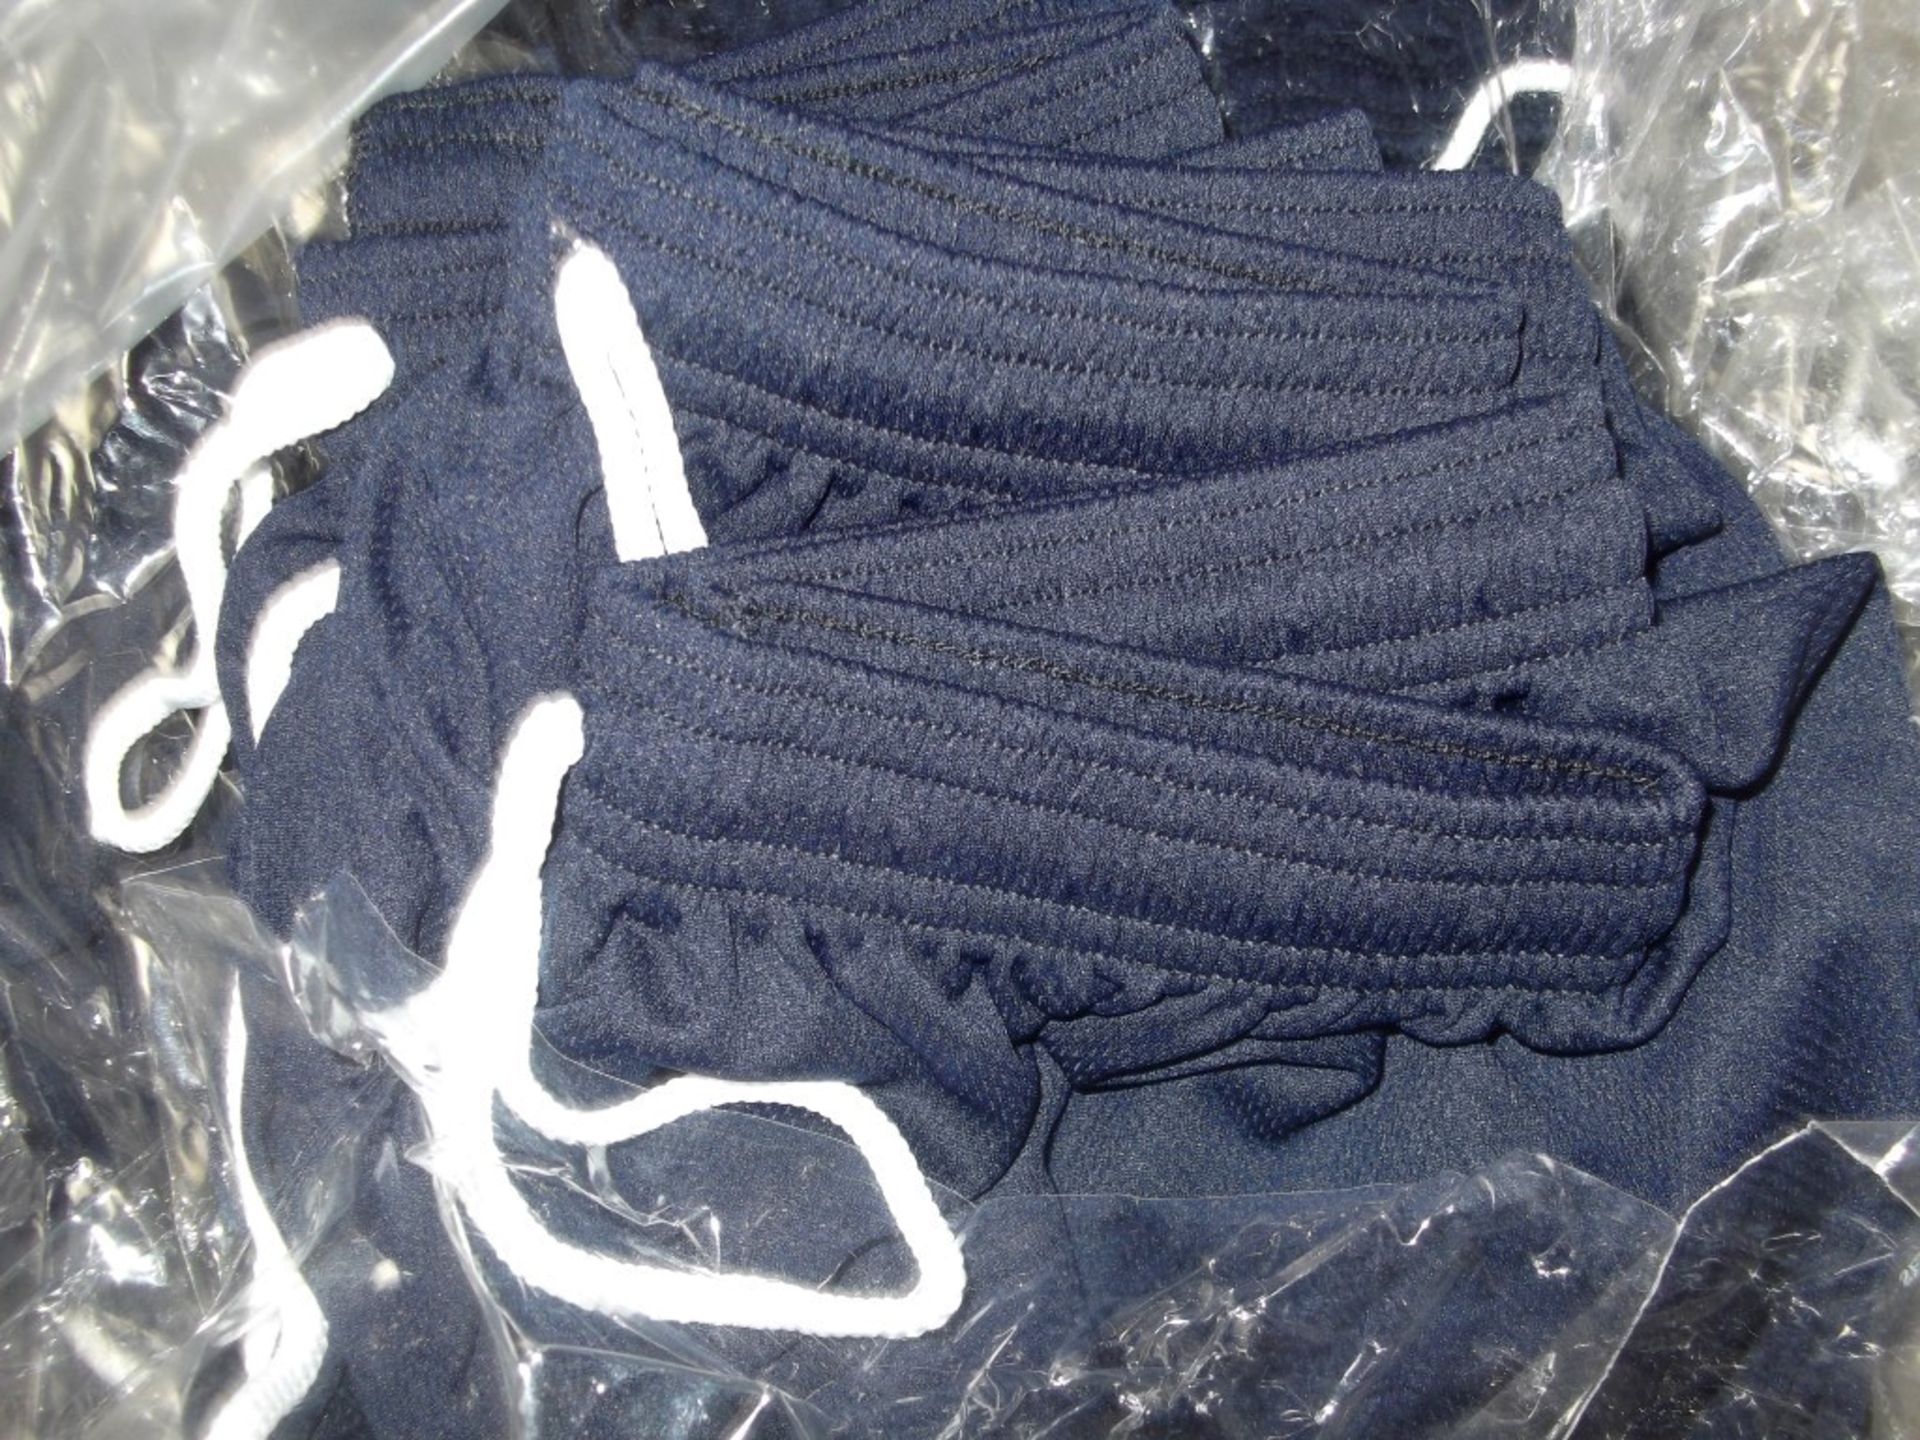 40 x Pairs Of Navy Blue Shorts - British Made - Sizes: 30 - 38 UK - New & Bagged - CL155 - Ref: - Image 2 of 3